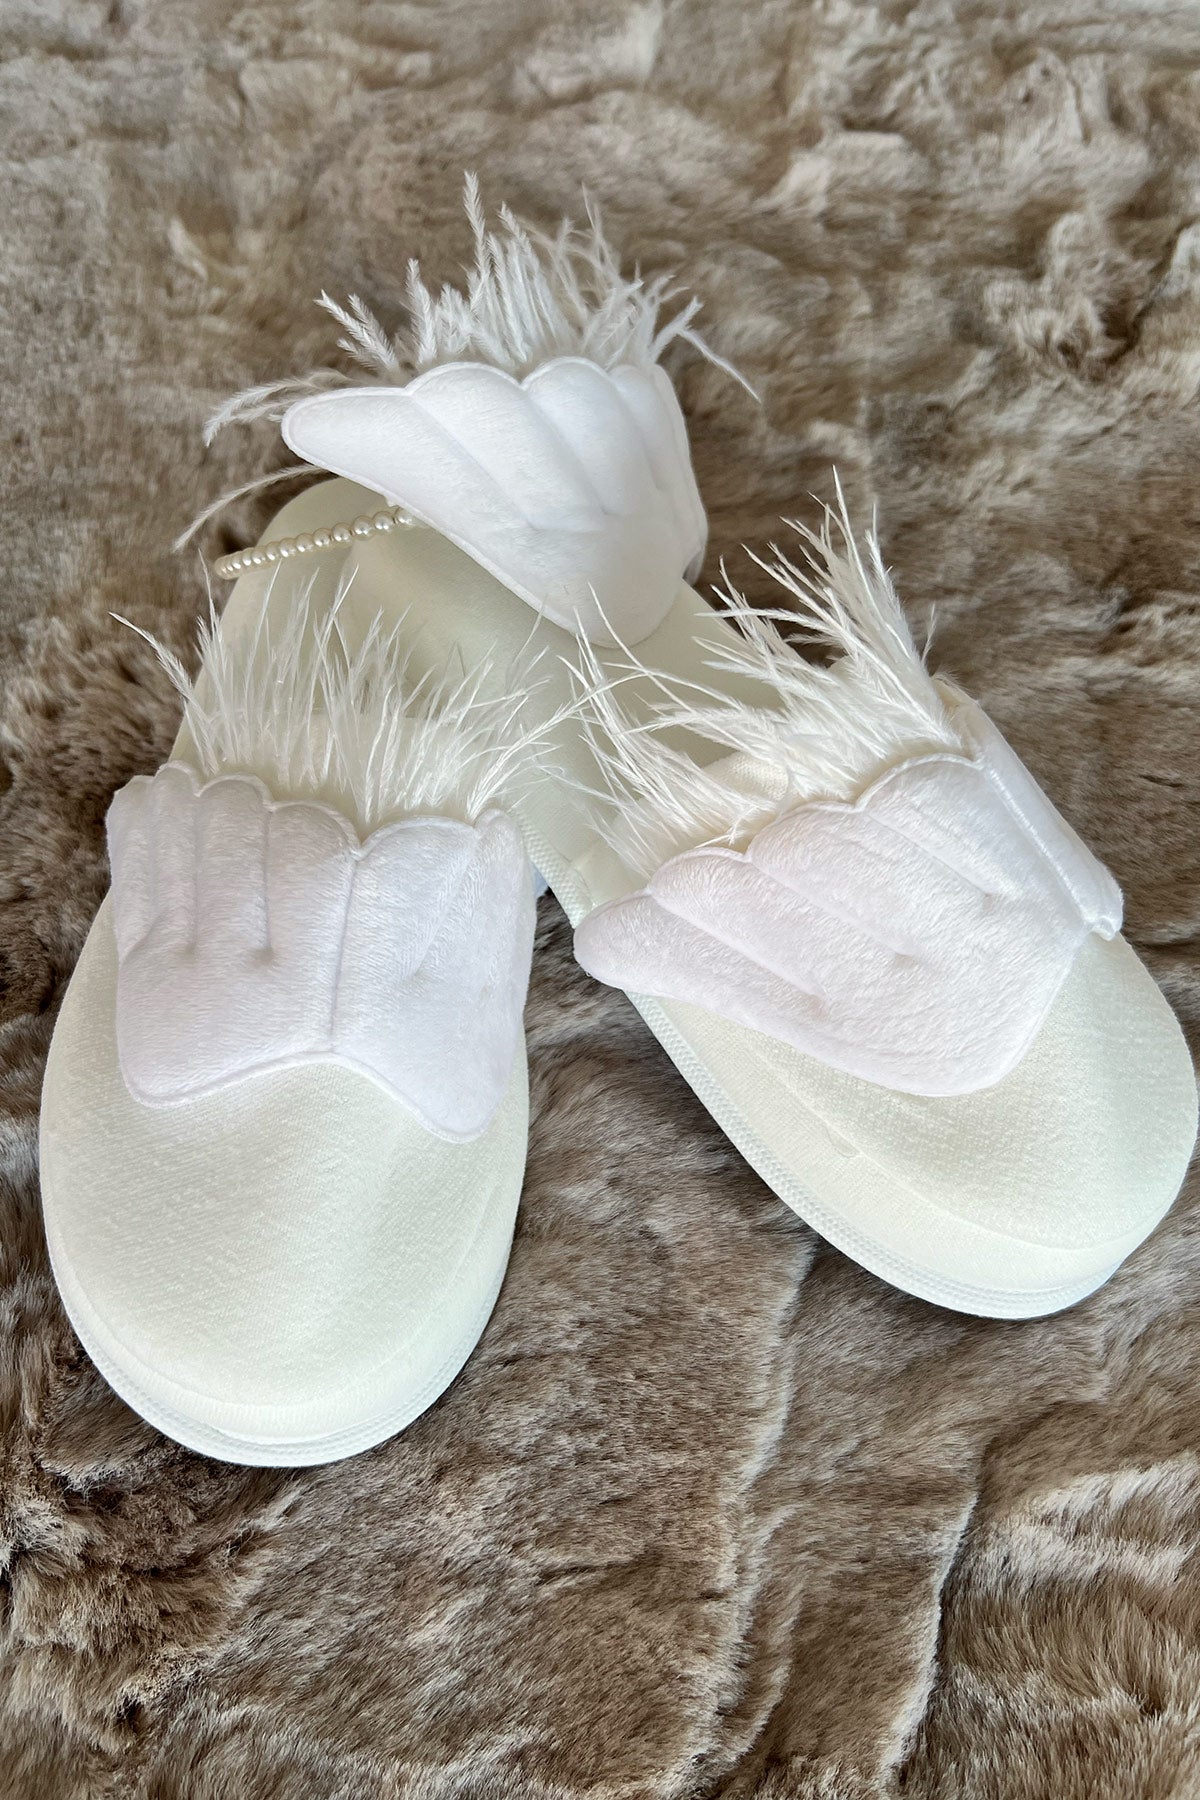 Shopymommy 757107 Angel Wing Maternity Crown & Maternity Slippers Set Ecru